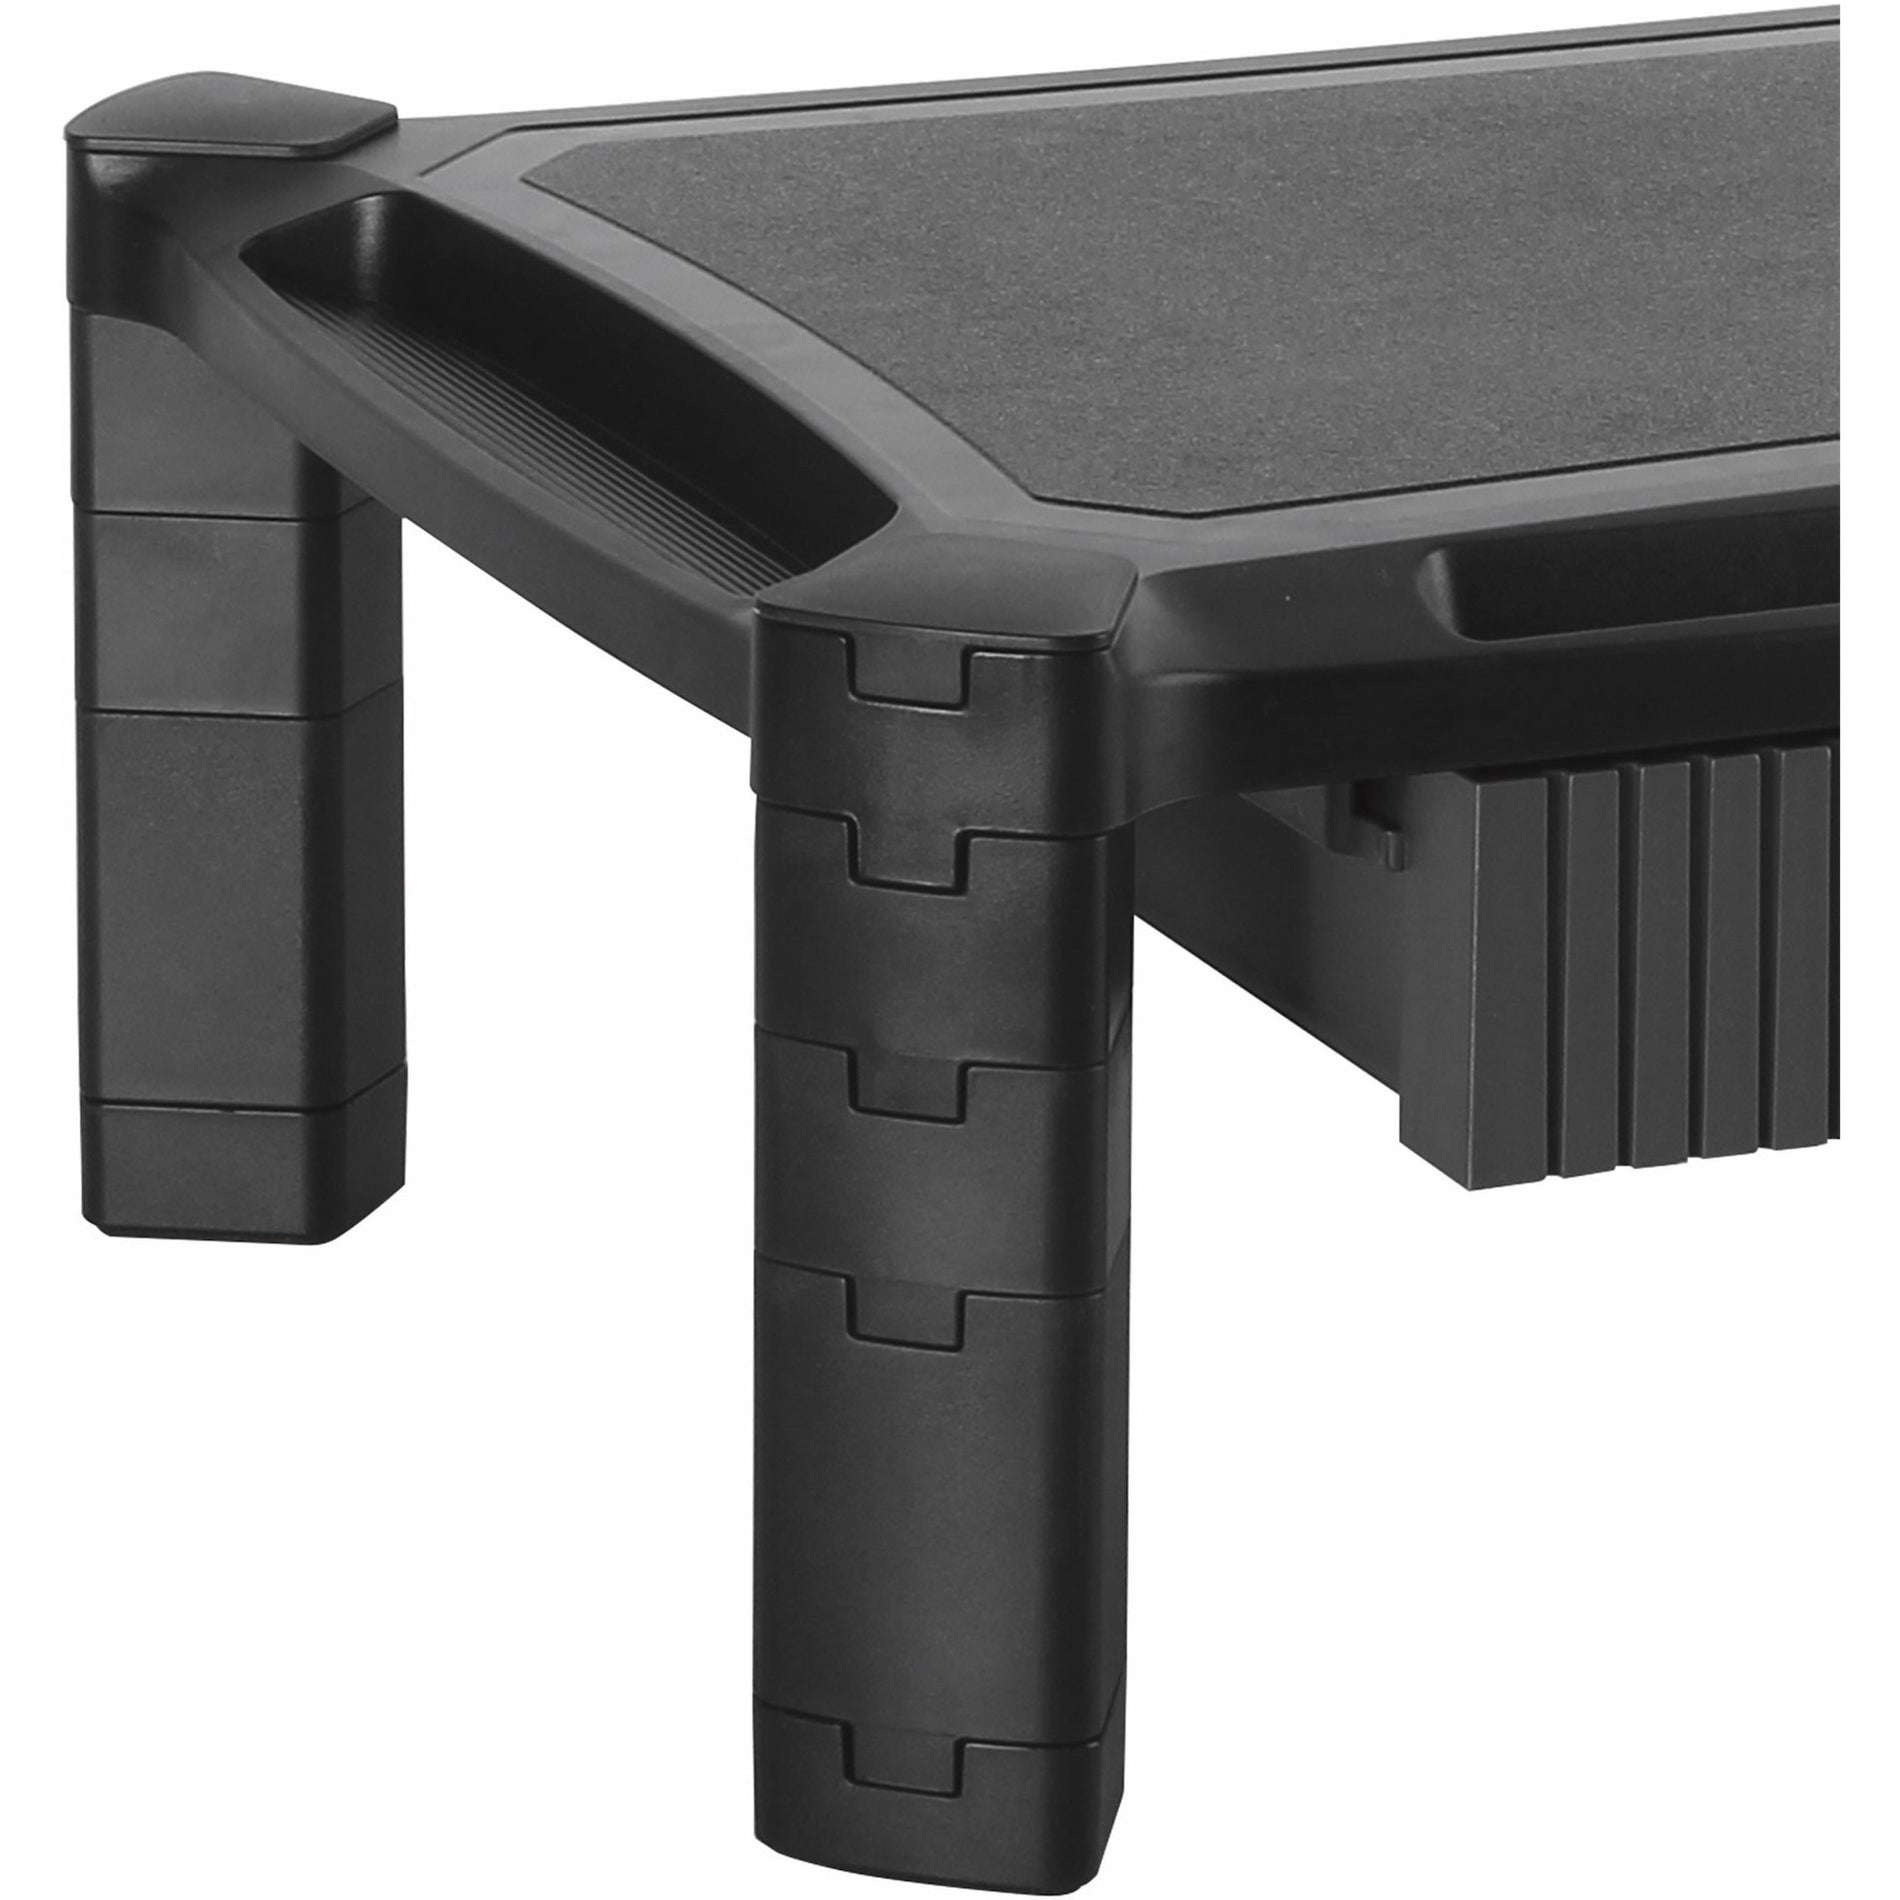 StarTech.com MONSTADJDL Monitor Riser with Drawer - Large (19.7"/500mm) - Height Adjustable - Stackable Columns, Computer Monitor Riser Stand for Desk - For up to 32" Monitor